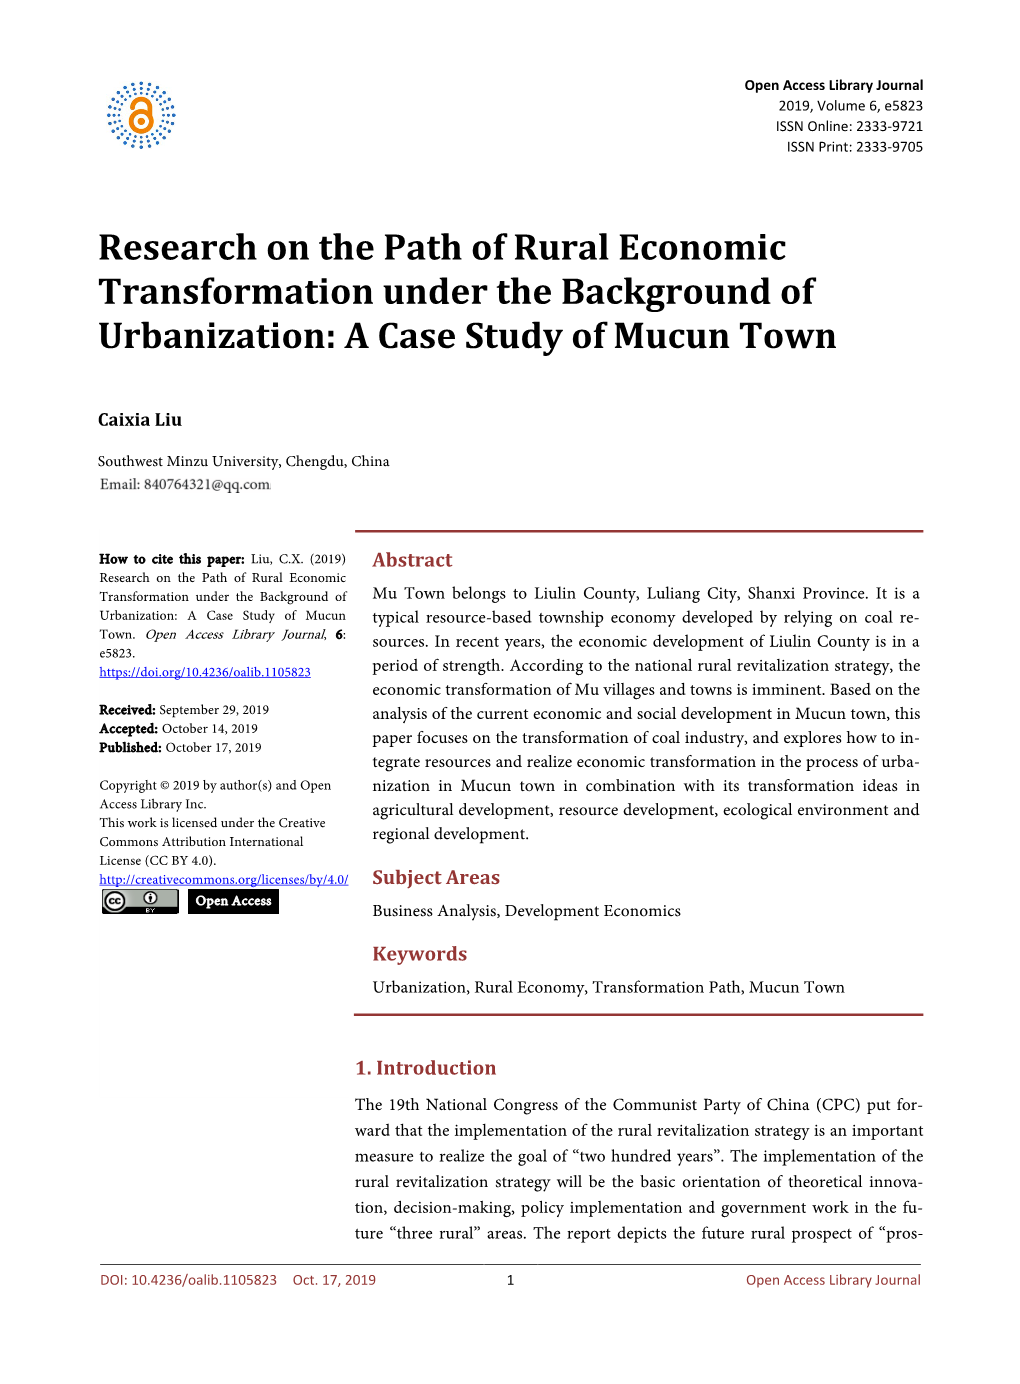 Research on the Path of Rural Economic Transformation Under the Background of Urbanization: a Case Study of Mucun Town